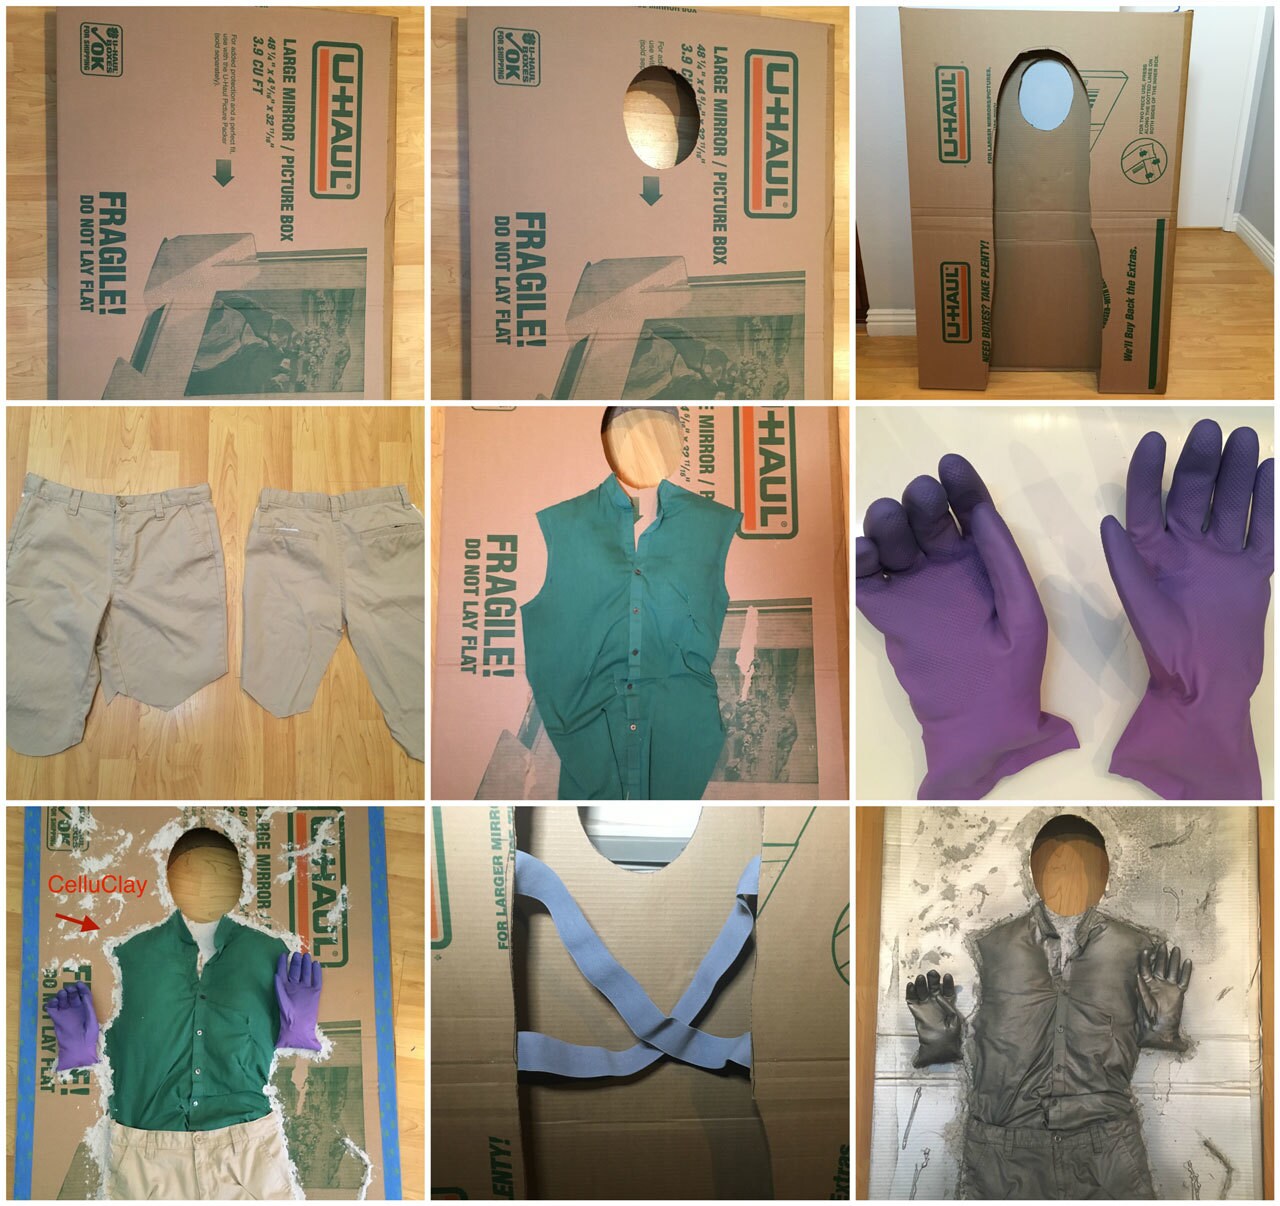 Nine panels illustrating how to create a DIY Han Solo in carbonite costume using a cardboard box.